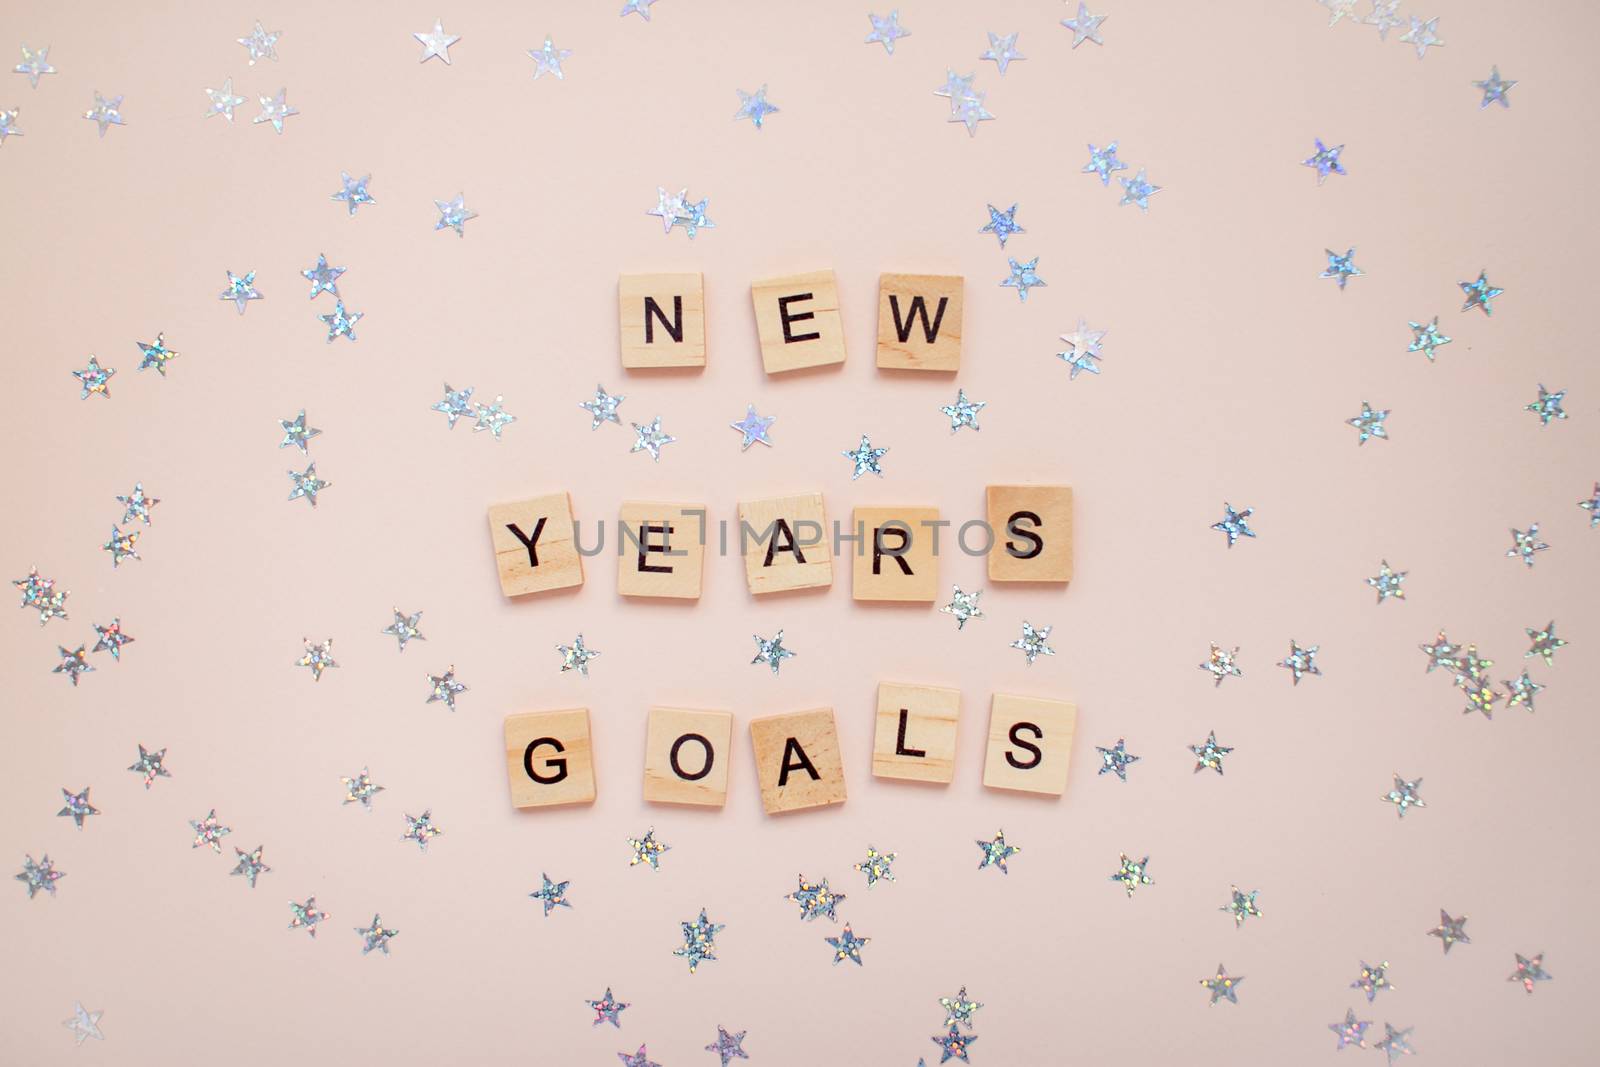 The inscription new years goals from wooden blocks on a light pink background. Silvery stars on a light pink background.